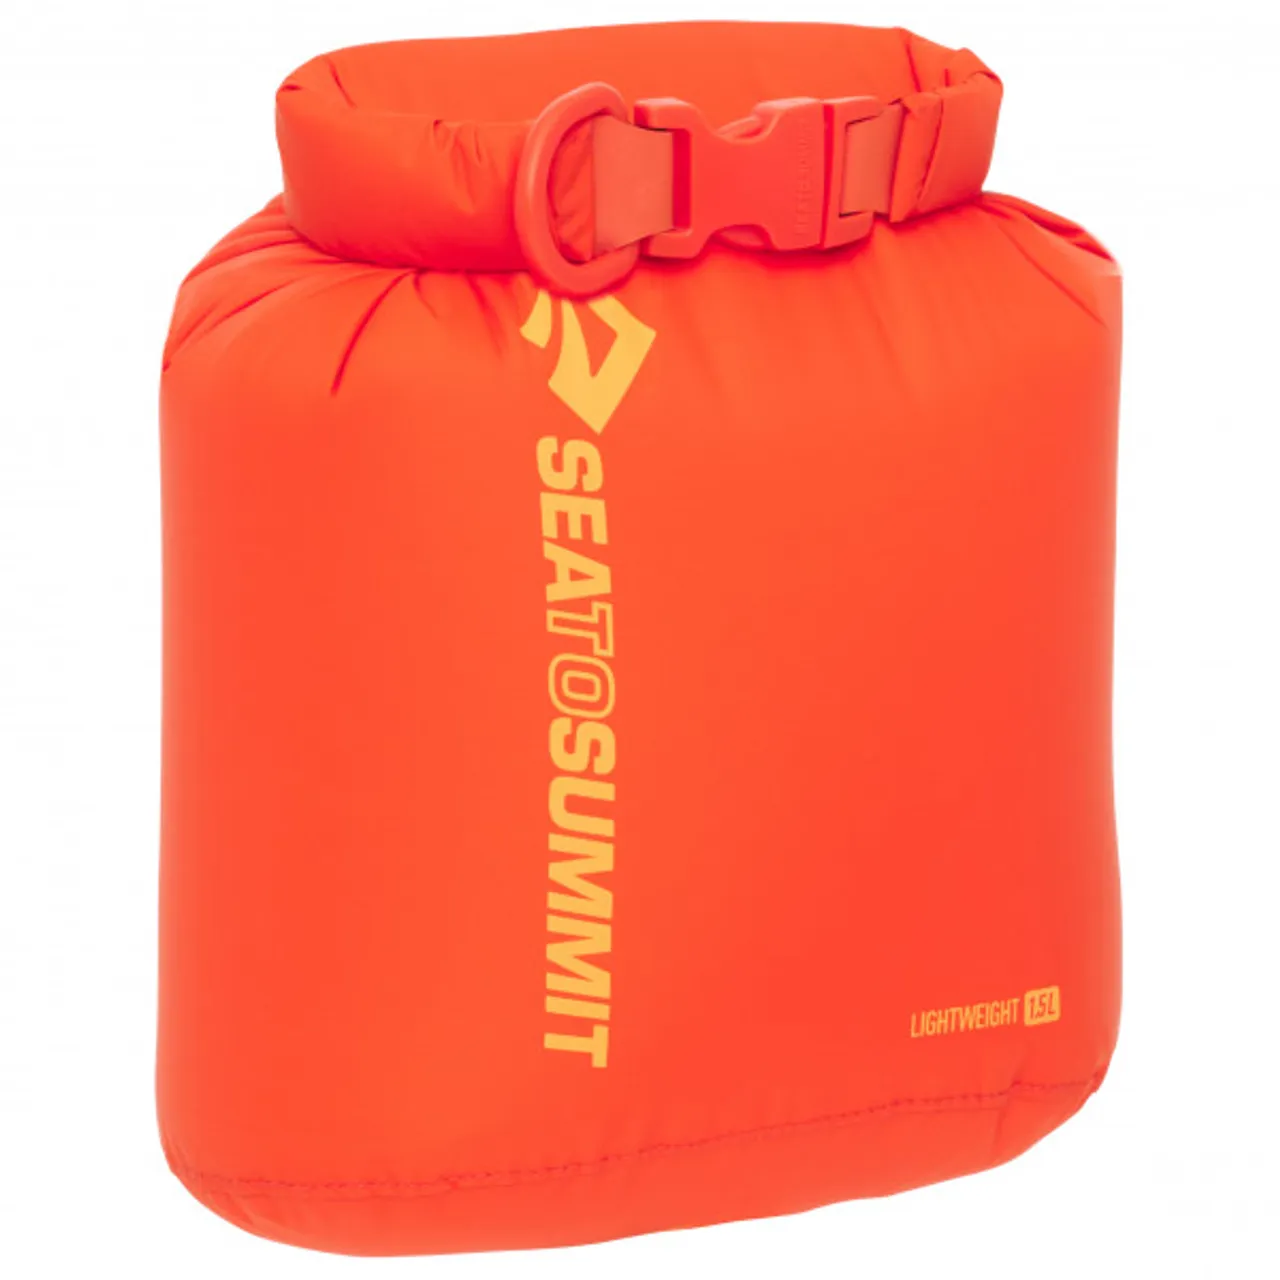 Sea to Summit - Lightweight Dry Bag - Packsack Gr 20 l rot